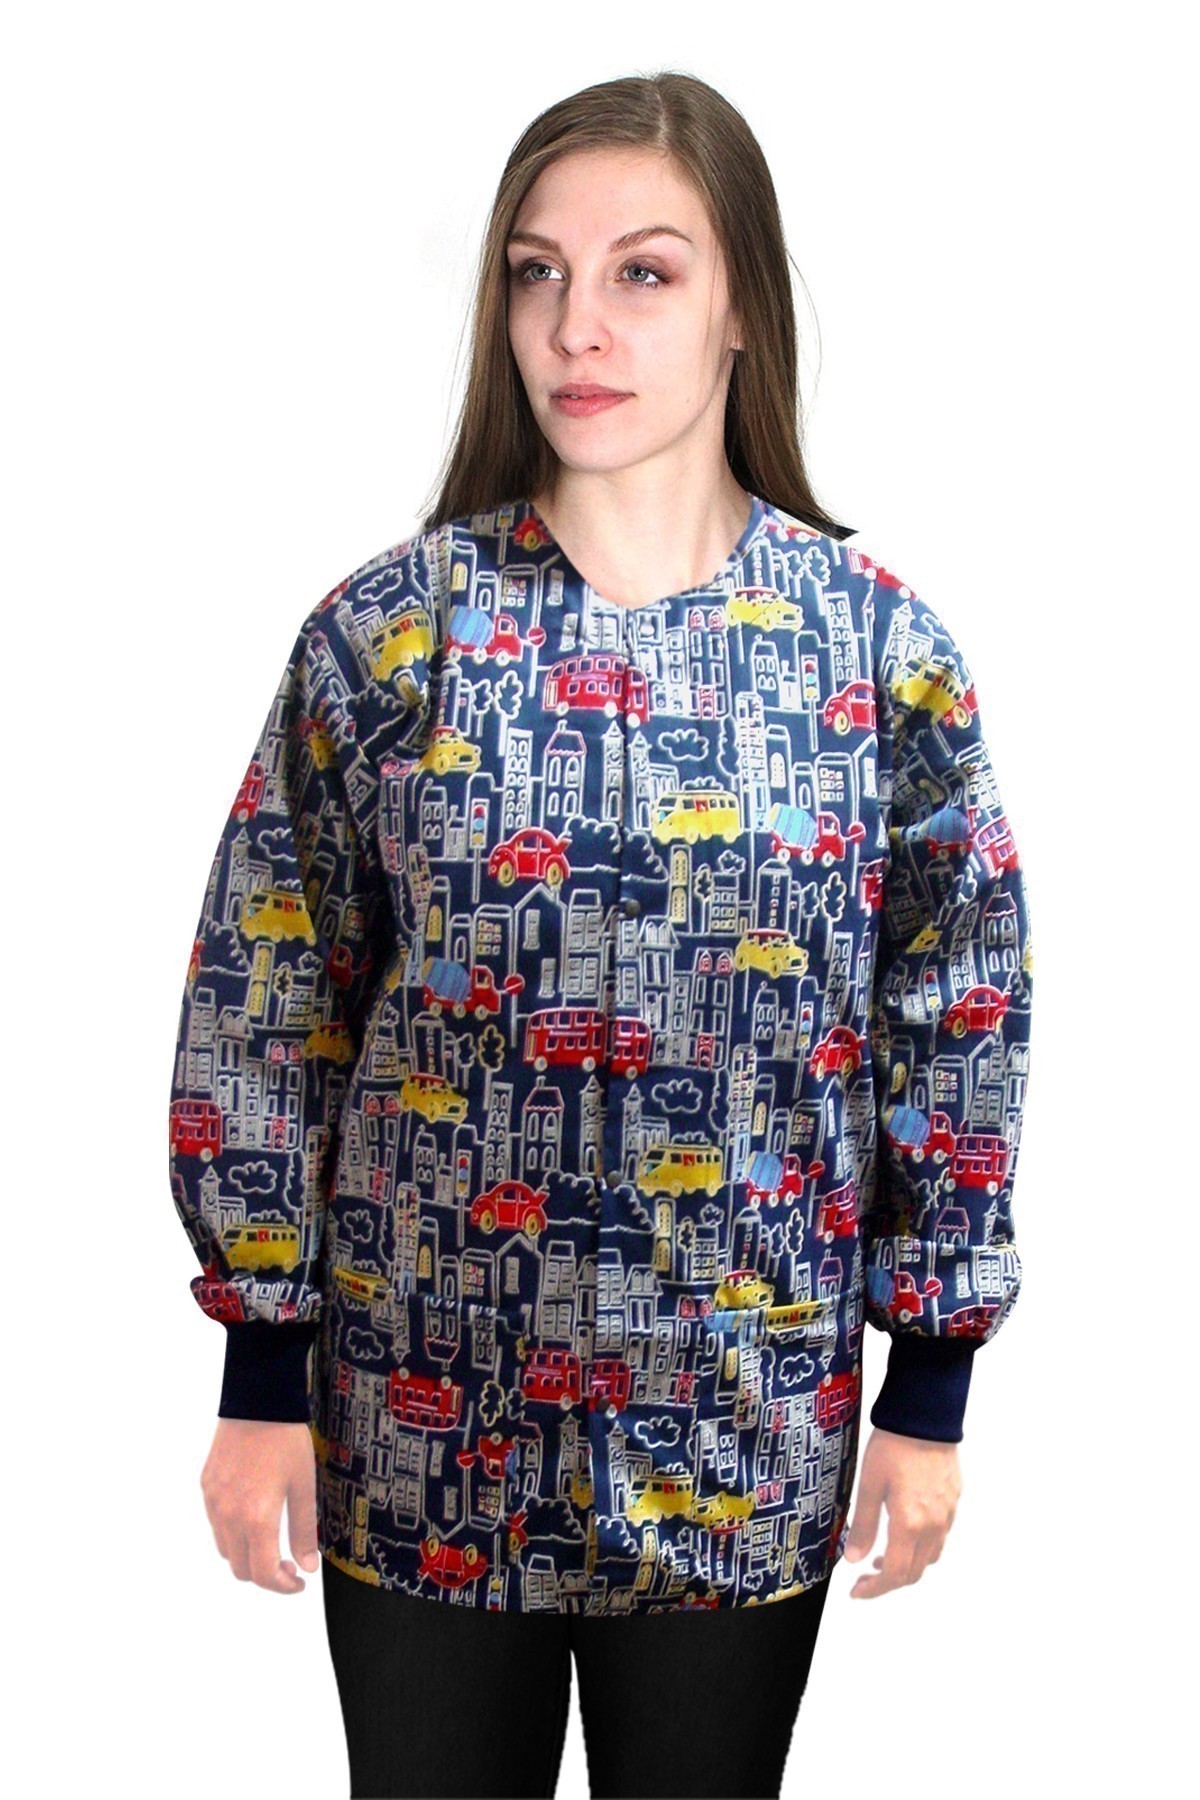 Jacket 2 pocket printed unisex full sleeve in Building and Bus print with rib